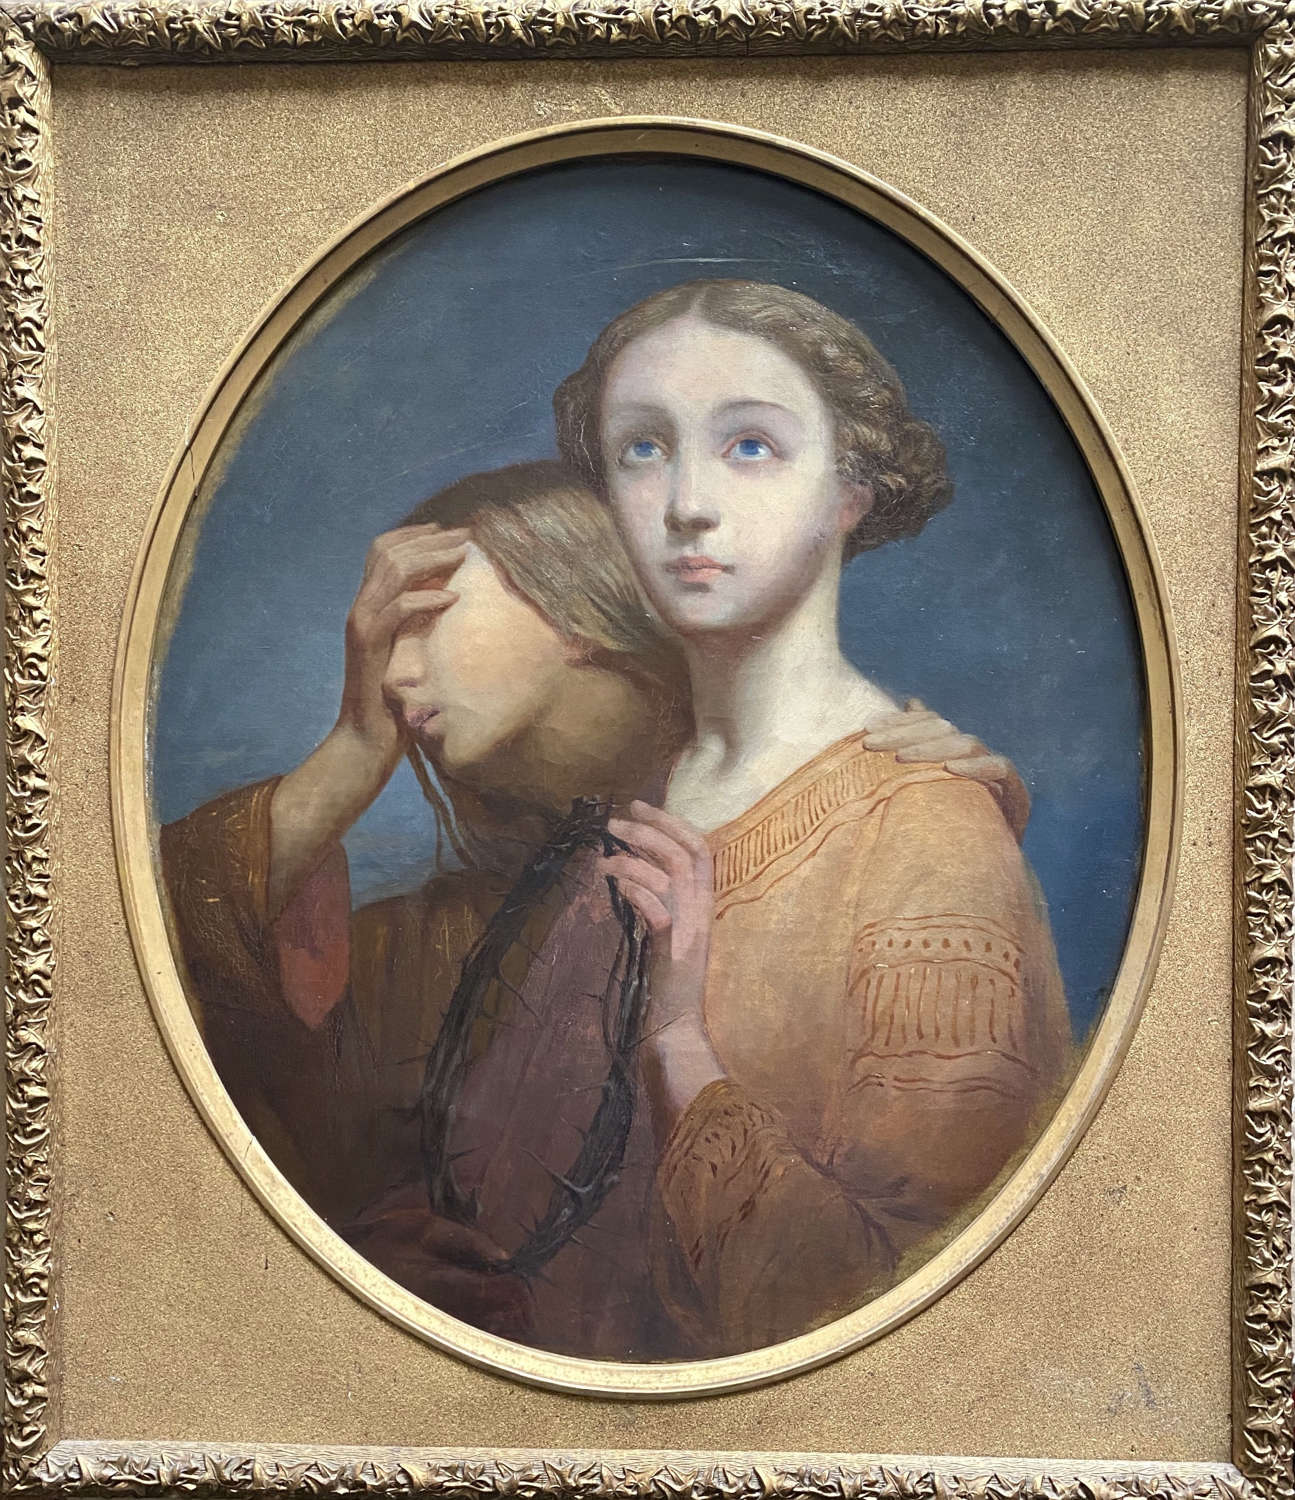 Two young girls, crown of thorns: mystic symbolist religious painting